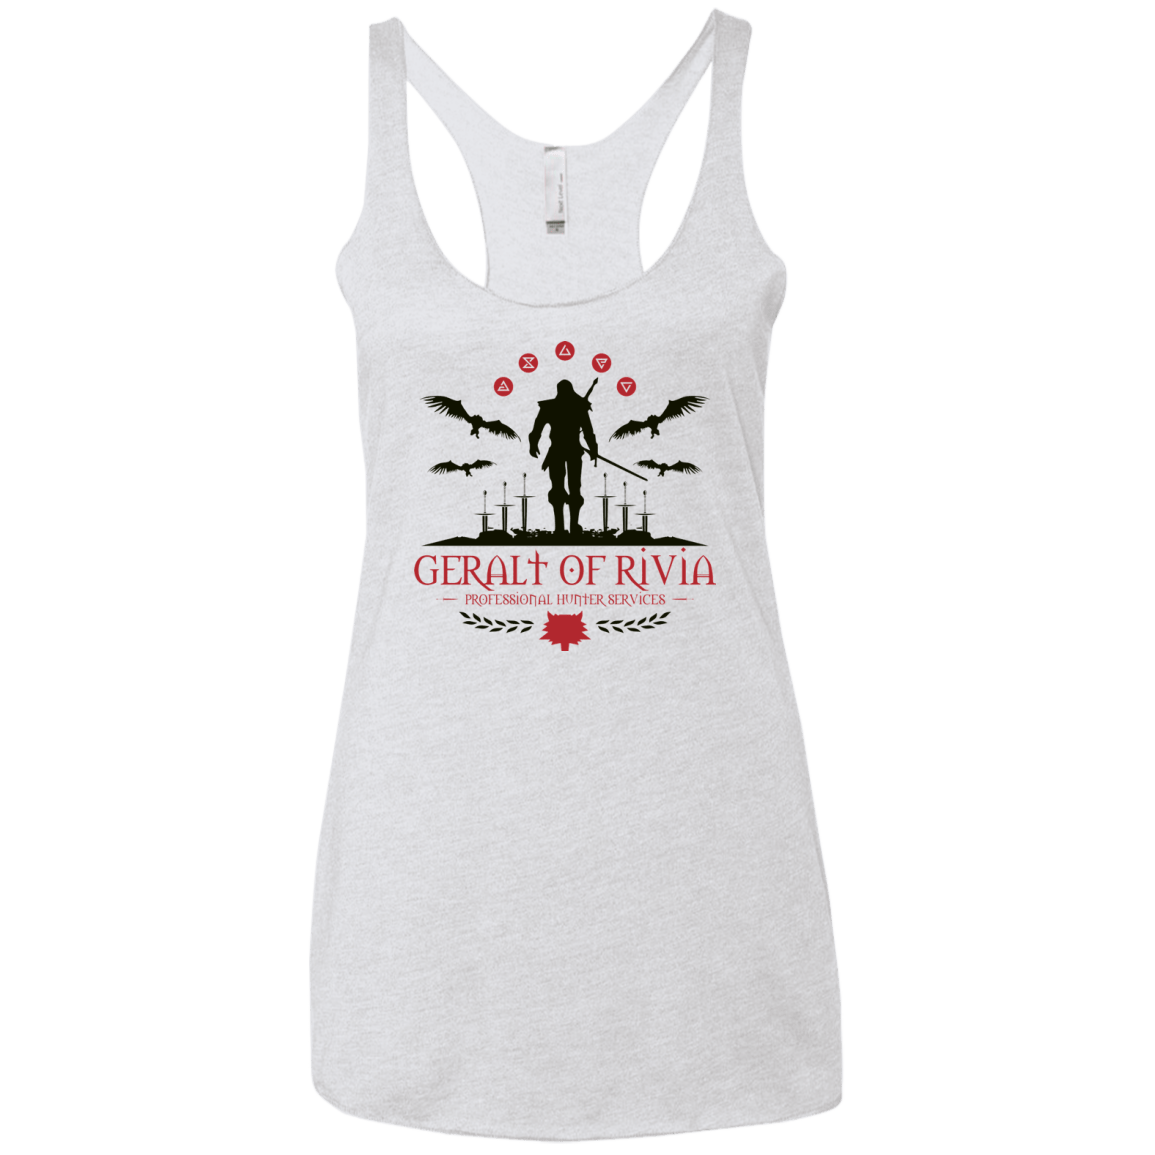 T-Shirts Heather White / X-Small The Witcher 3 Wild Hunt Women's Triblend Racerback Tank